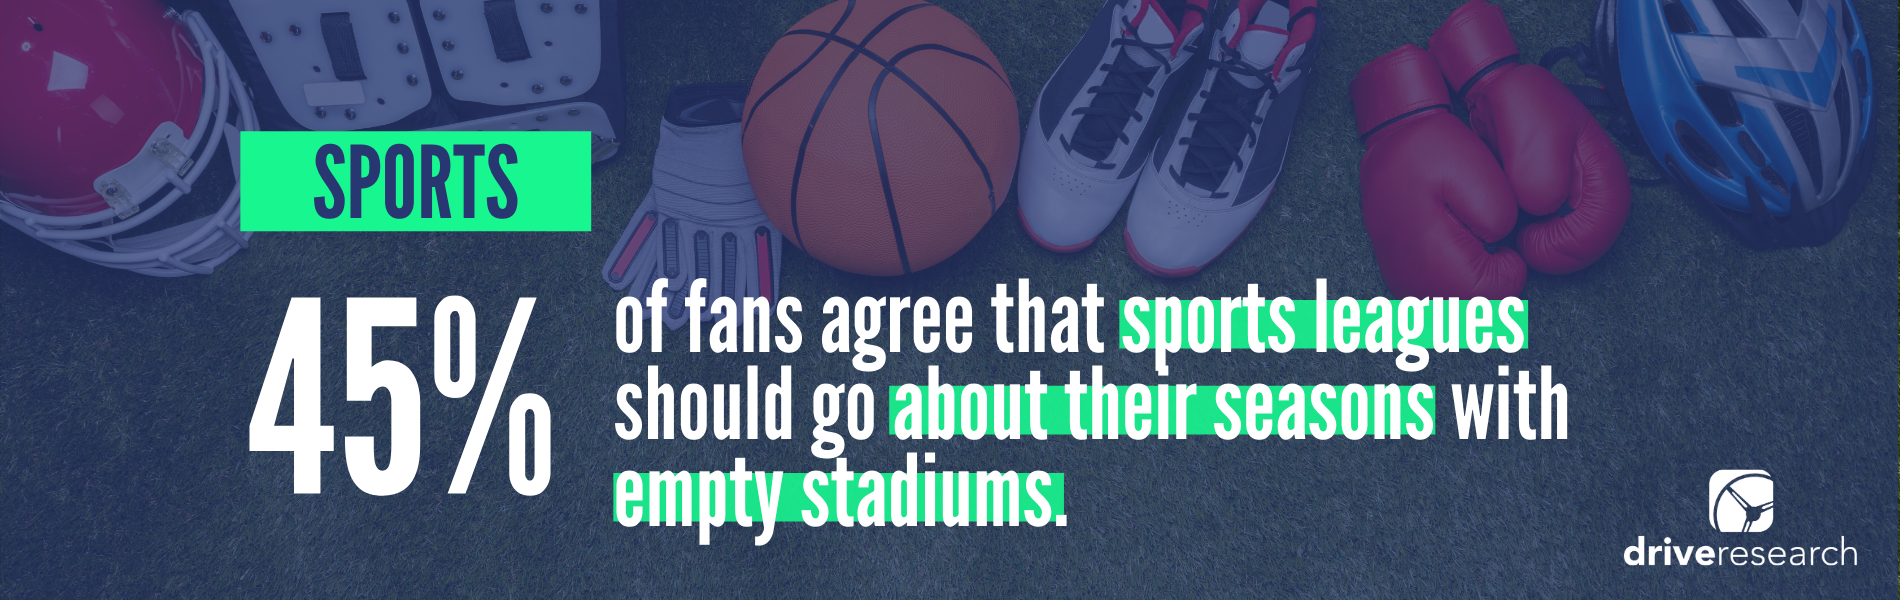 45% of fans agree that sports leagues should go about their seasons with empty stadiums.